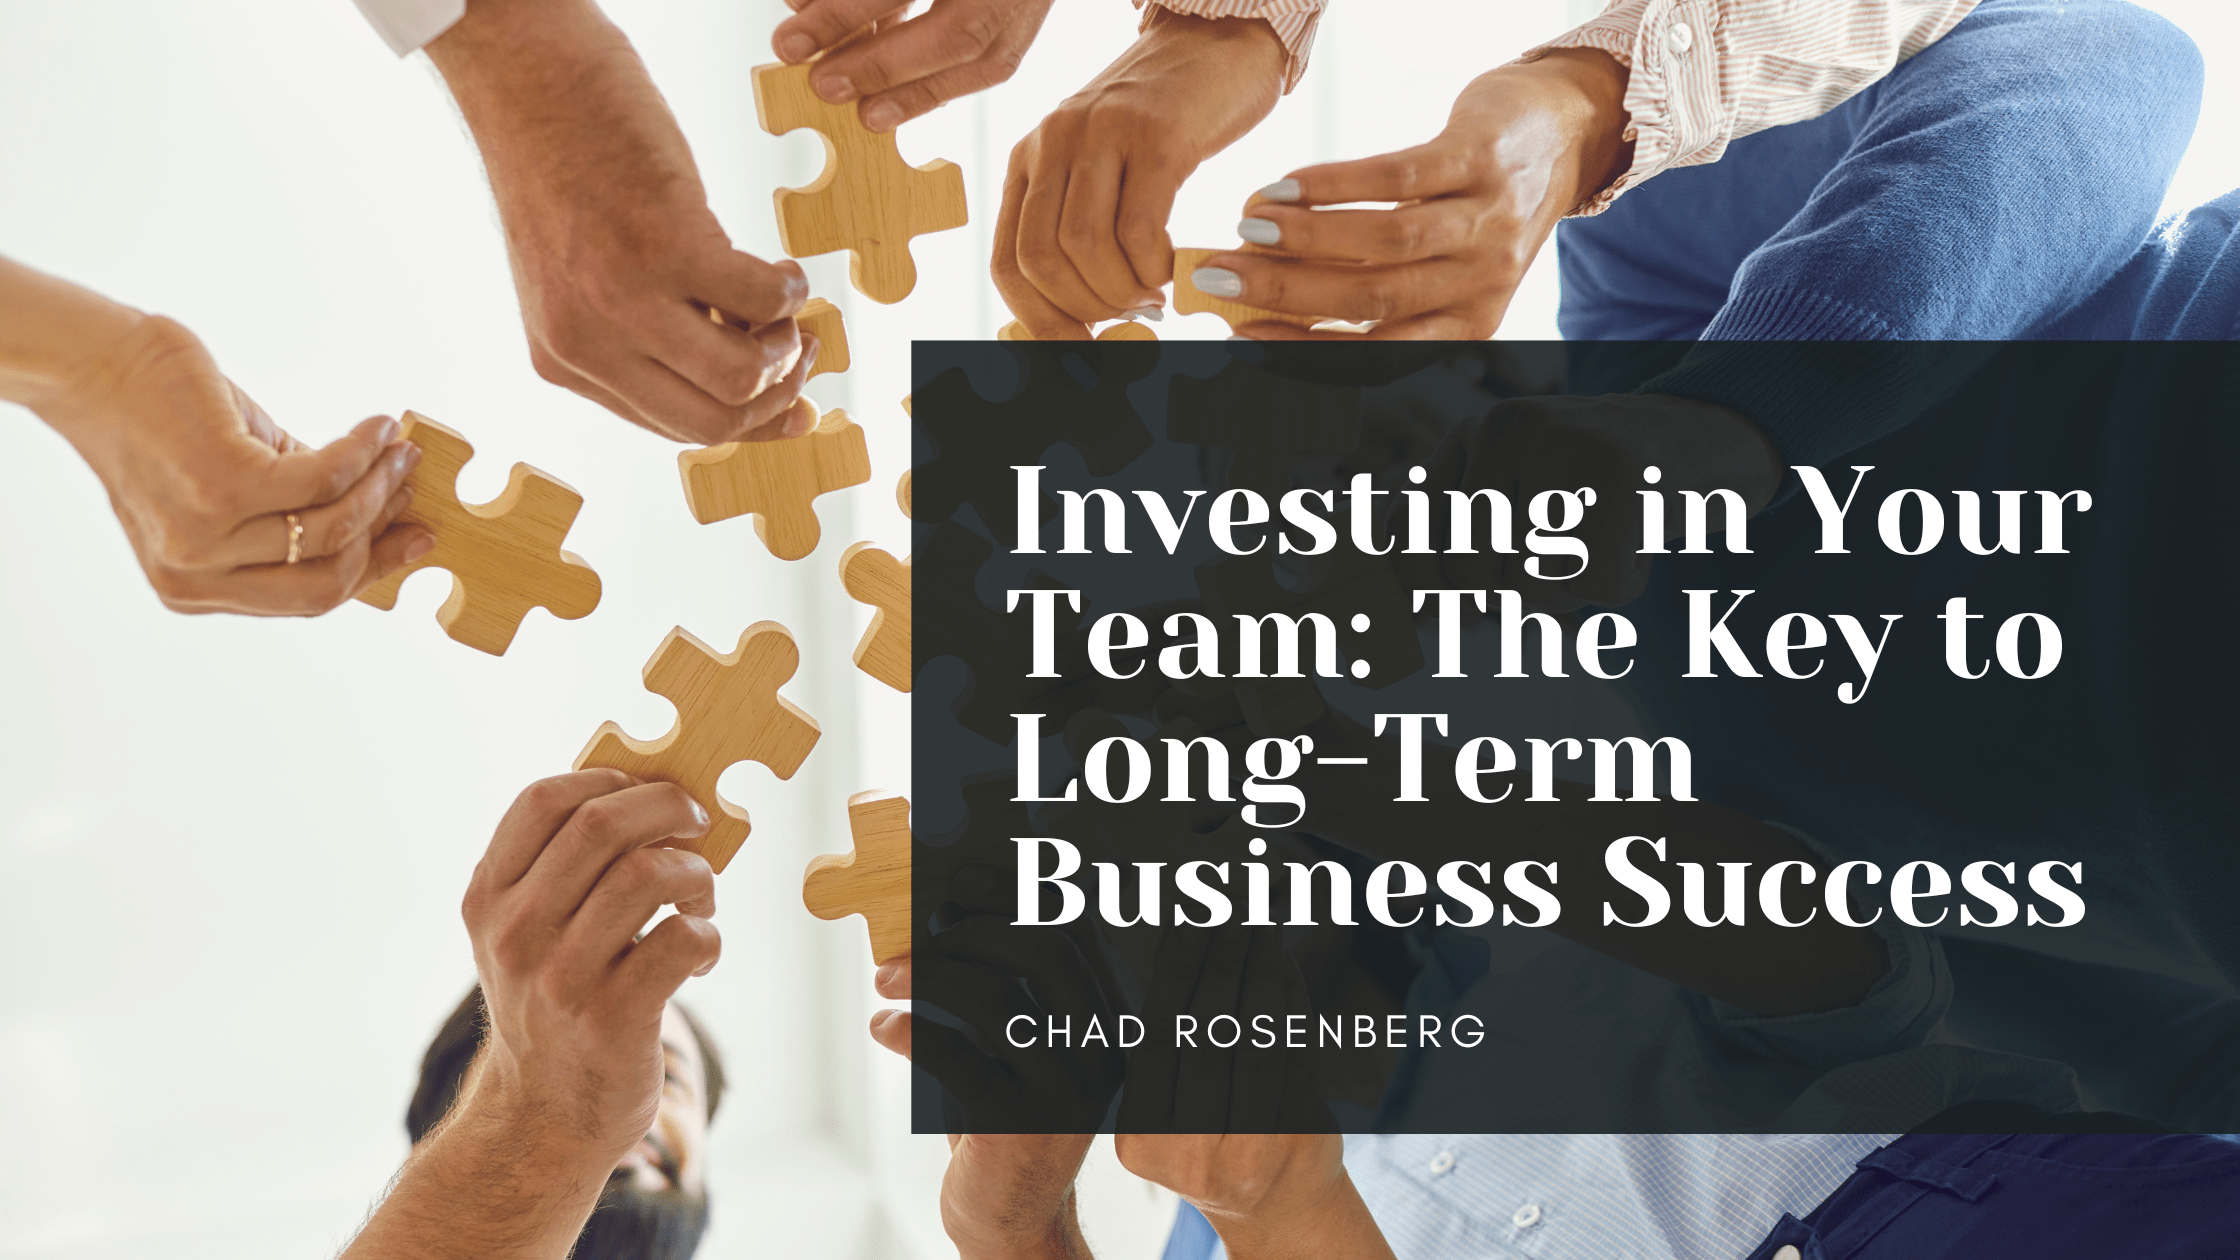 Investing in Your Team: The Key to Long-Term Business Success